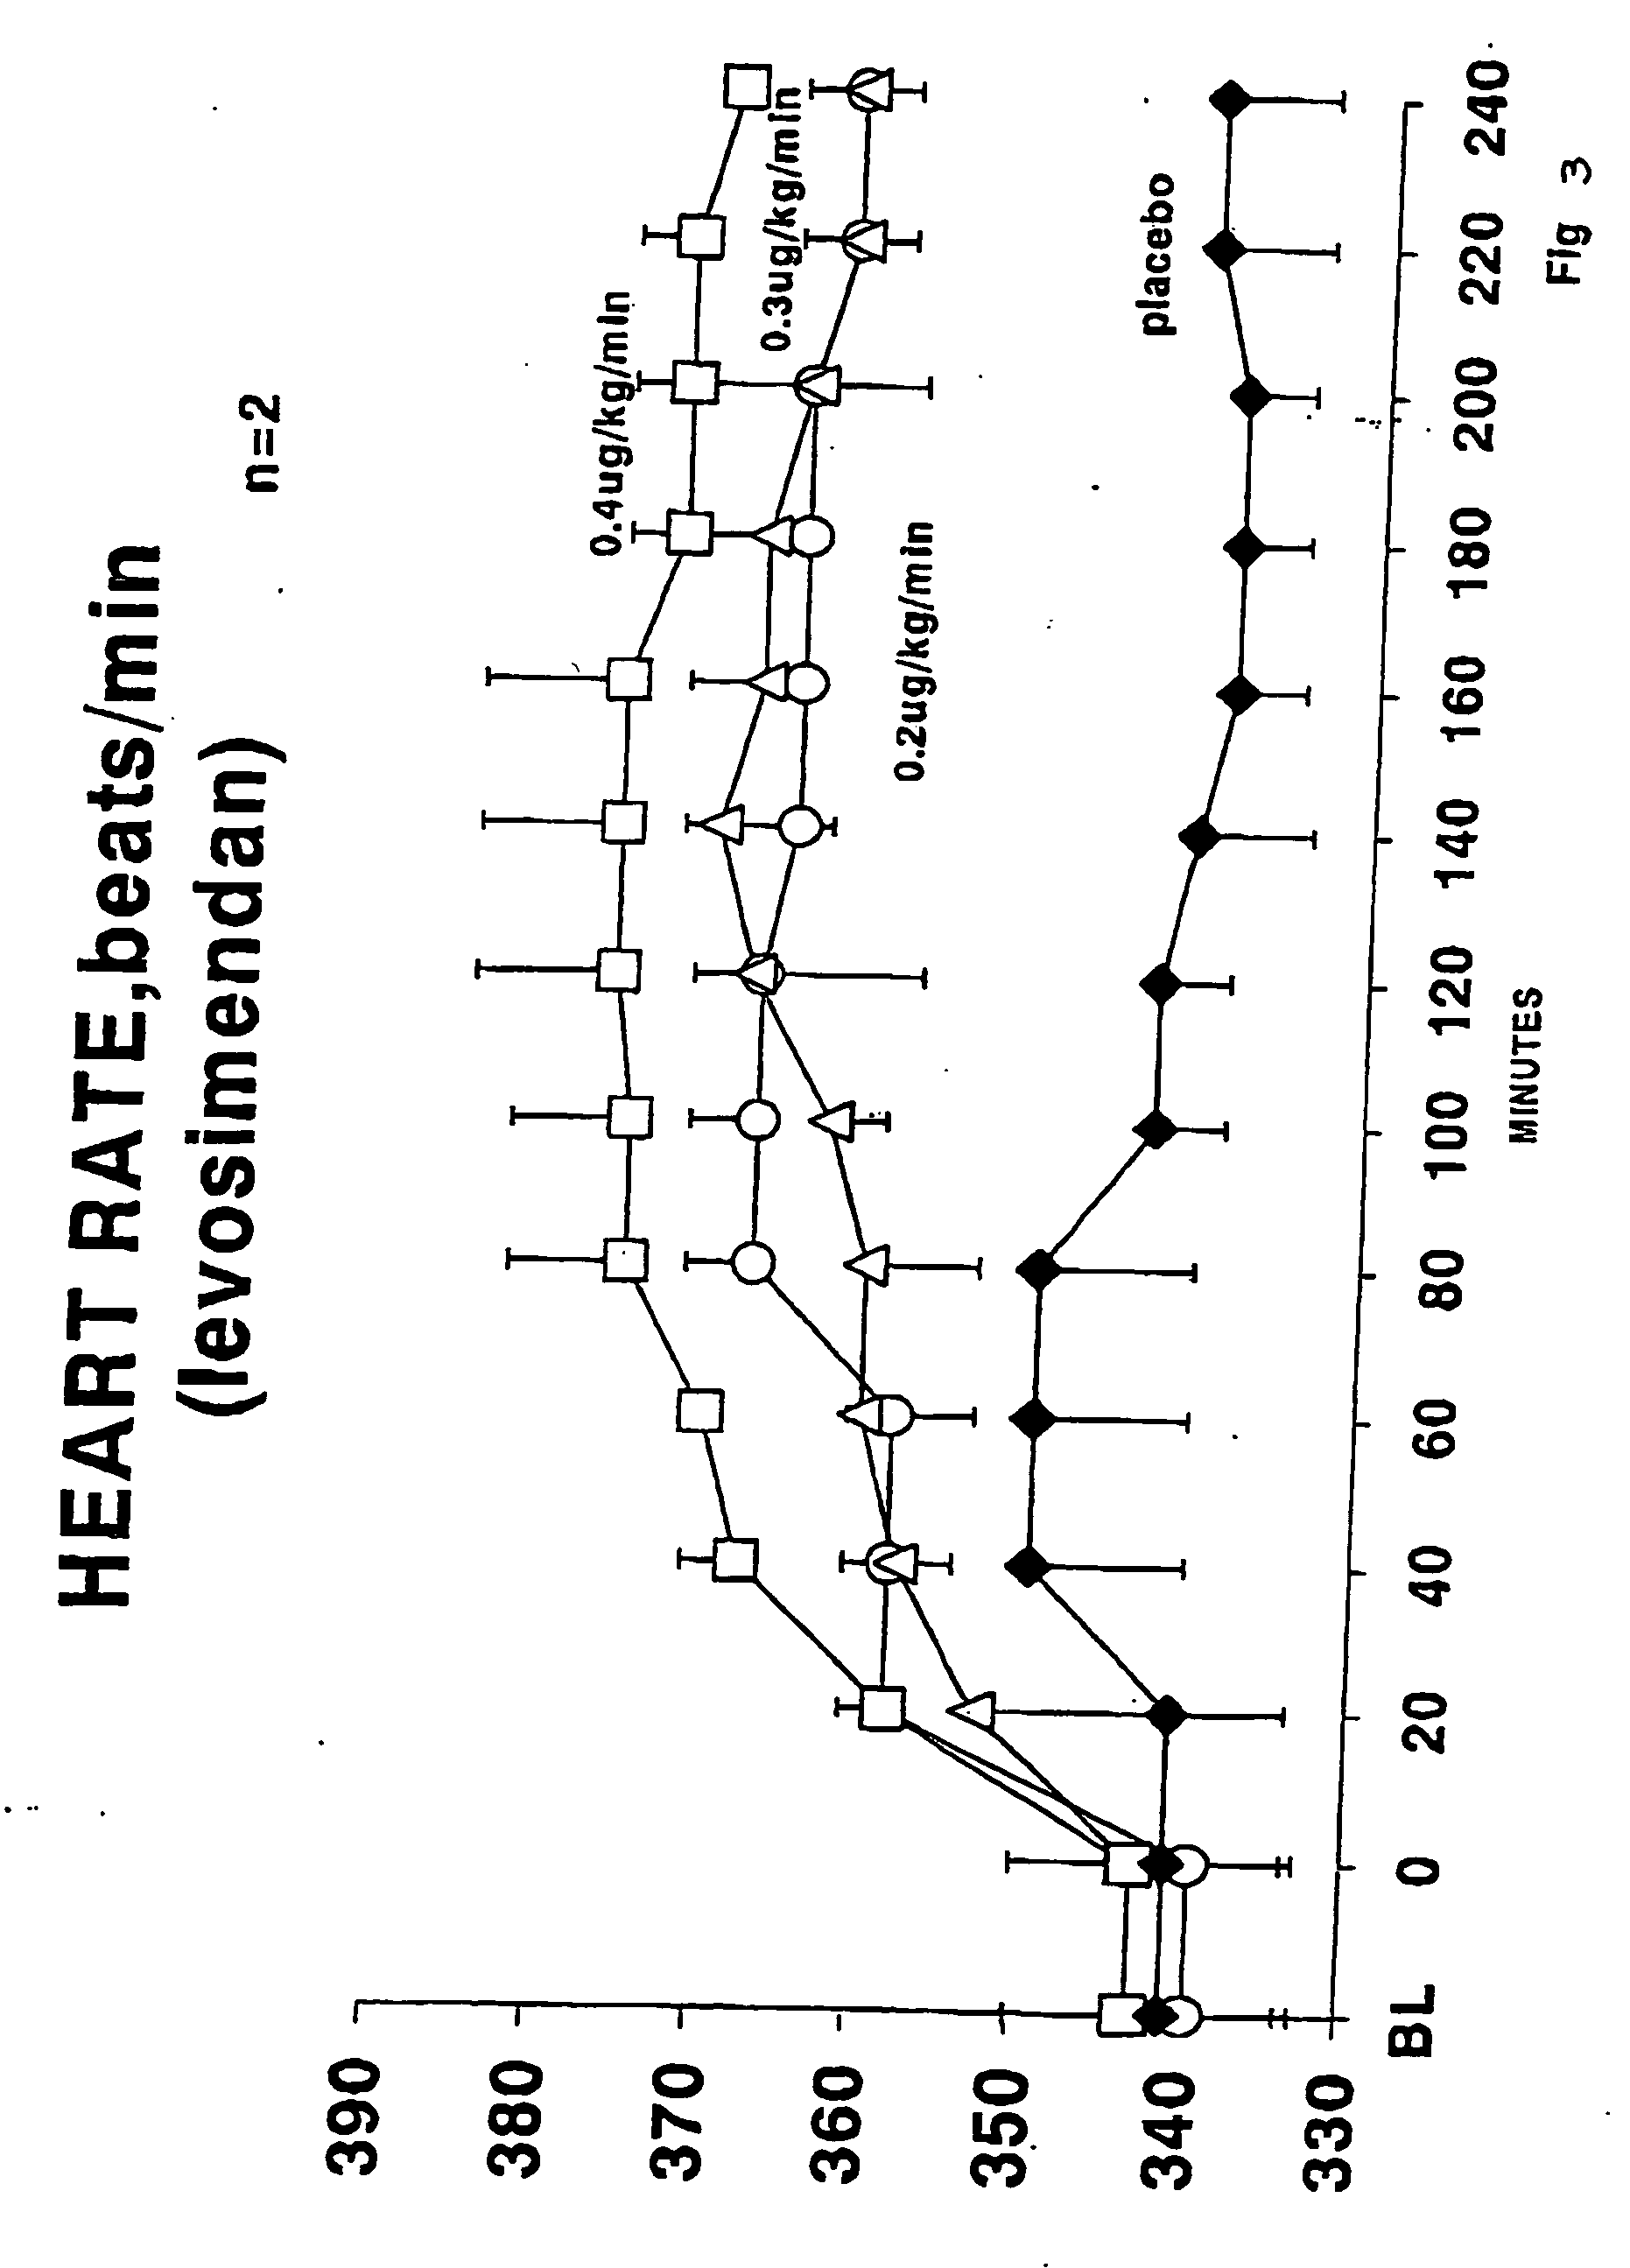 Methods for treating a mammal before, during and after cardiac arrest